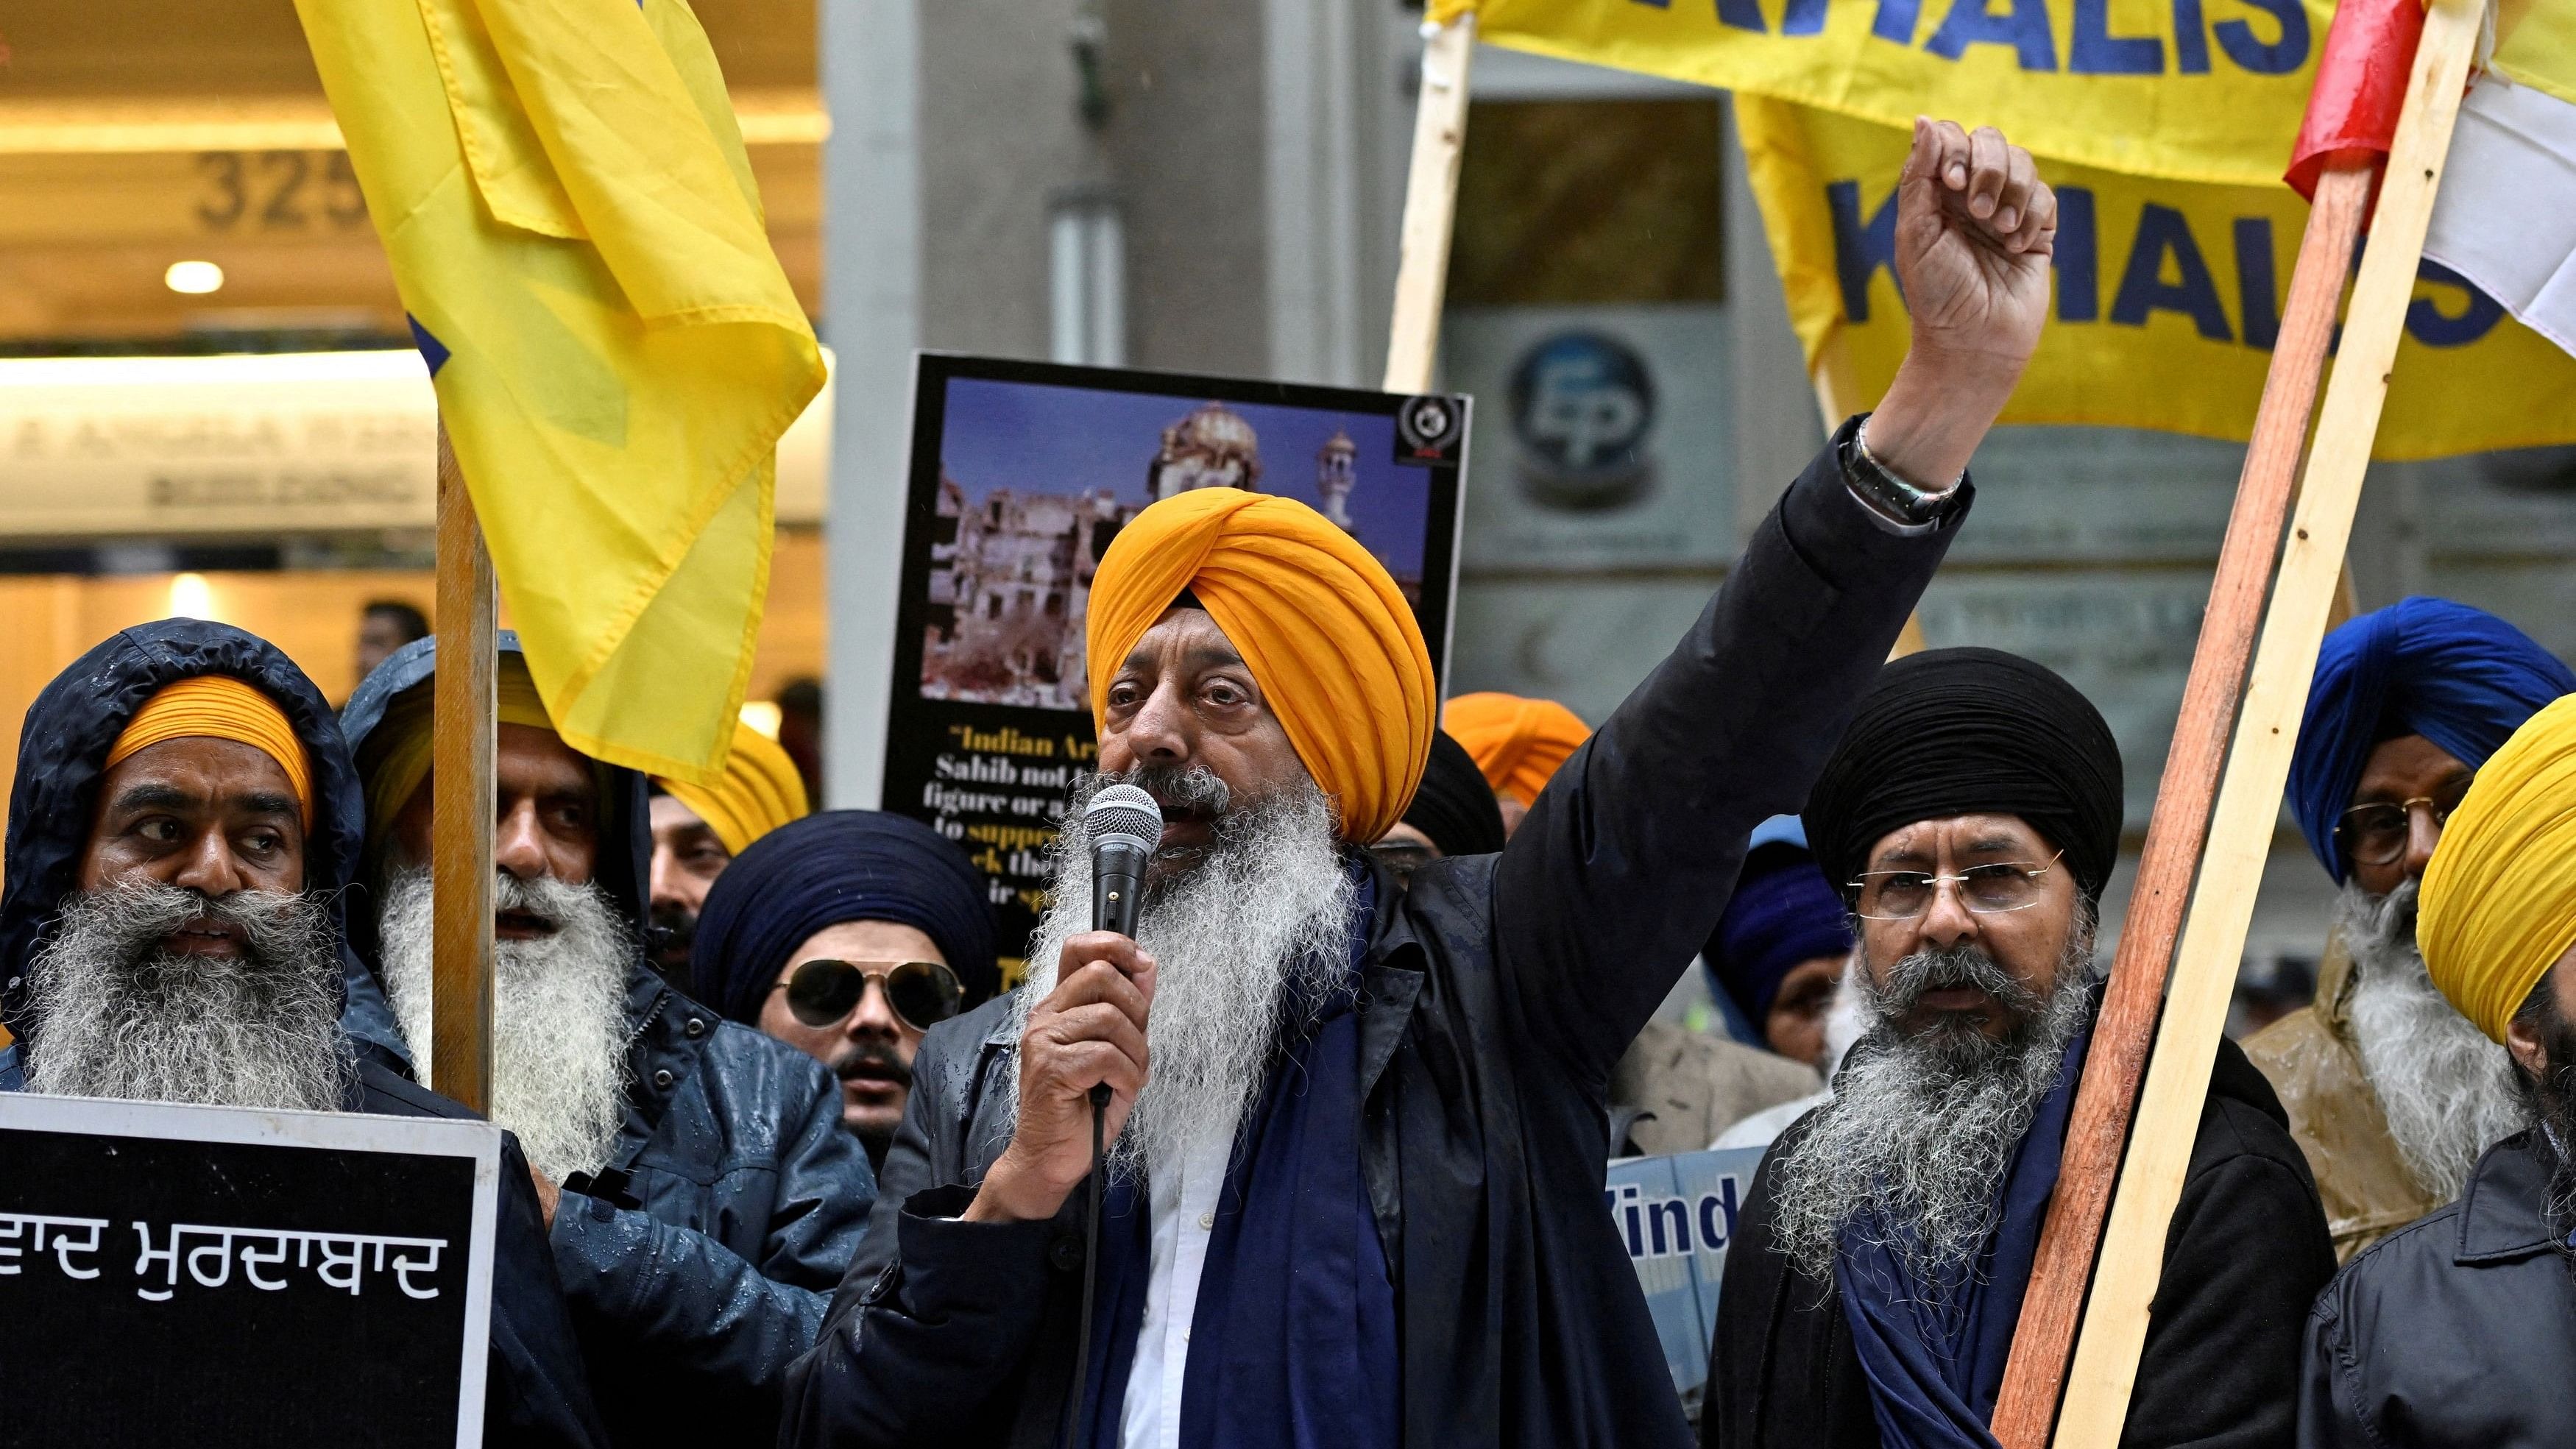 <div class="paragraphs"><p>A demonstrator uses a microphone as others hold flags and signs as they protest outside India's consulate, a week after Canada's Prime Minister Justin Trudeau raised the prospect of New Delhi's involvement in the murder of Sikh separatist leader Hardeep Singh Nijjar, in Vancouver, British Columbia, Canada </p></div>